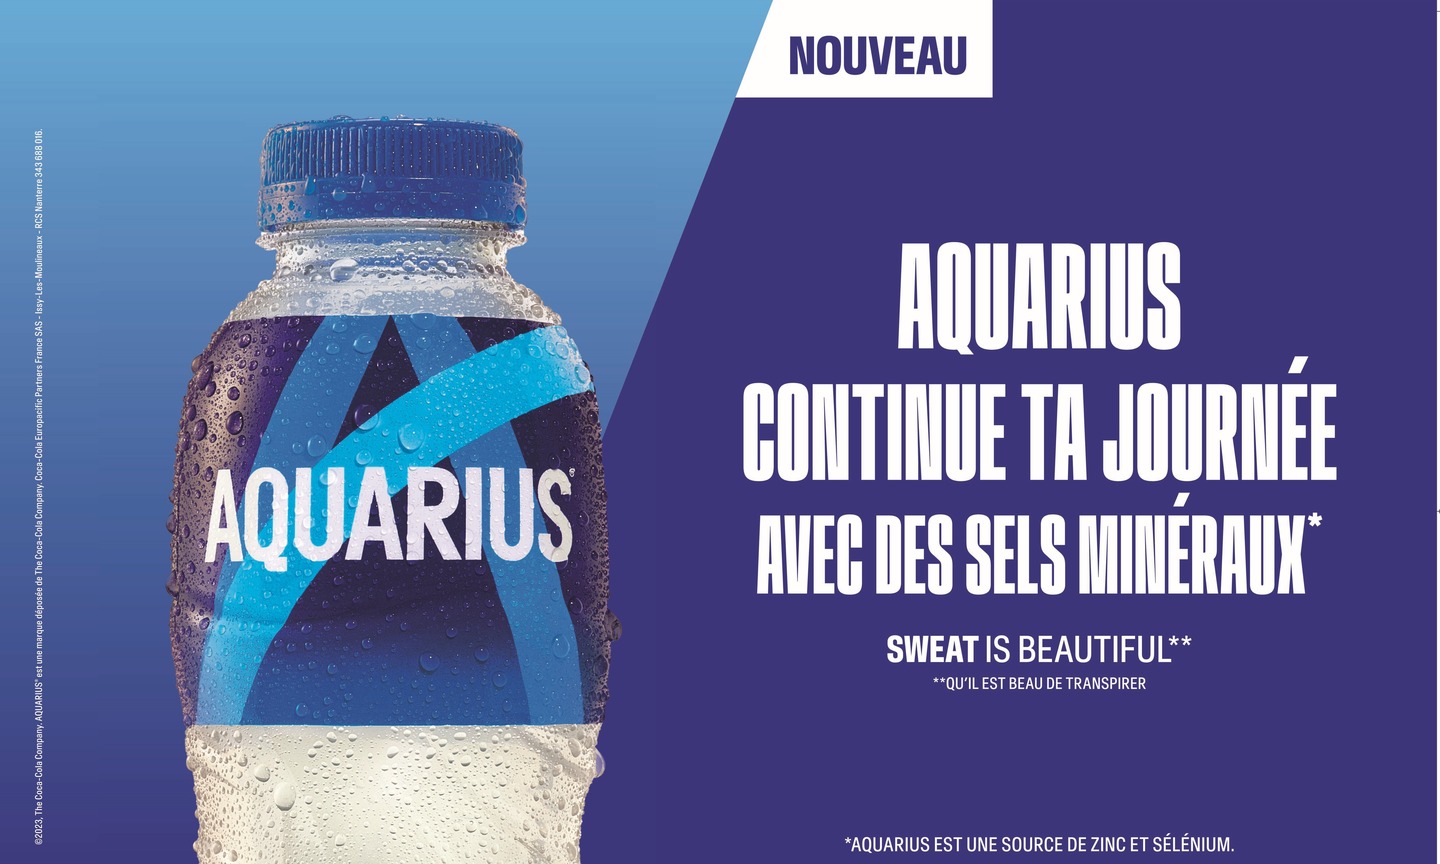 Aquarius for daily hydration - sweat is beautiful